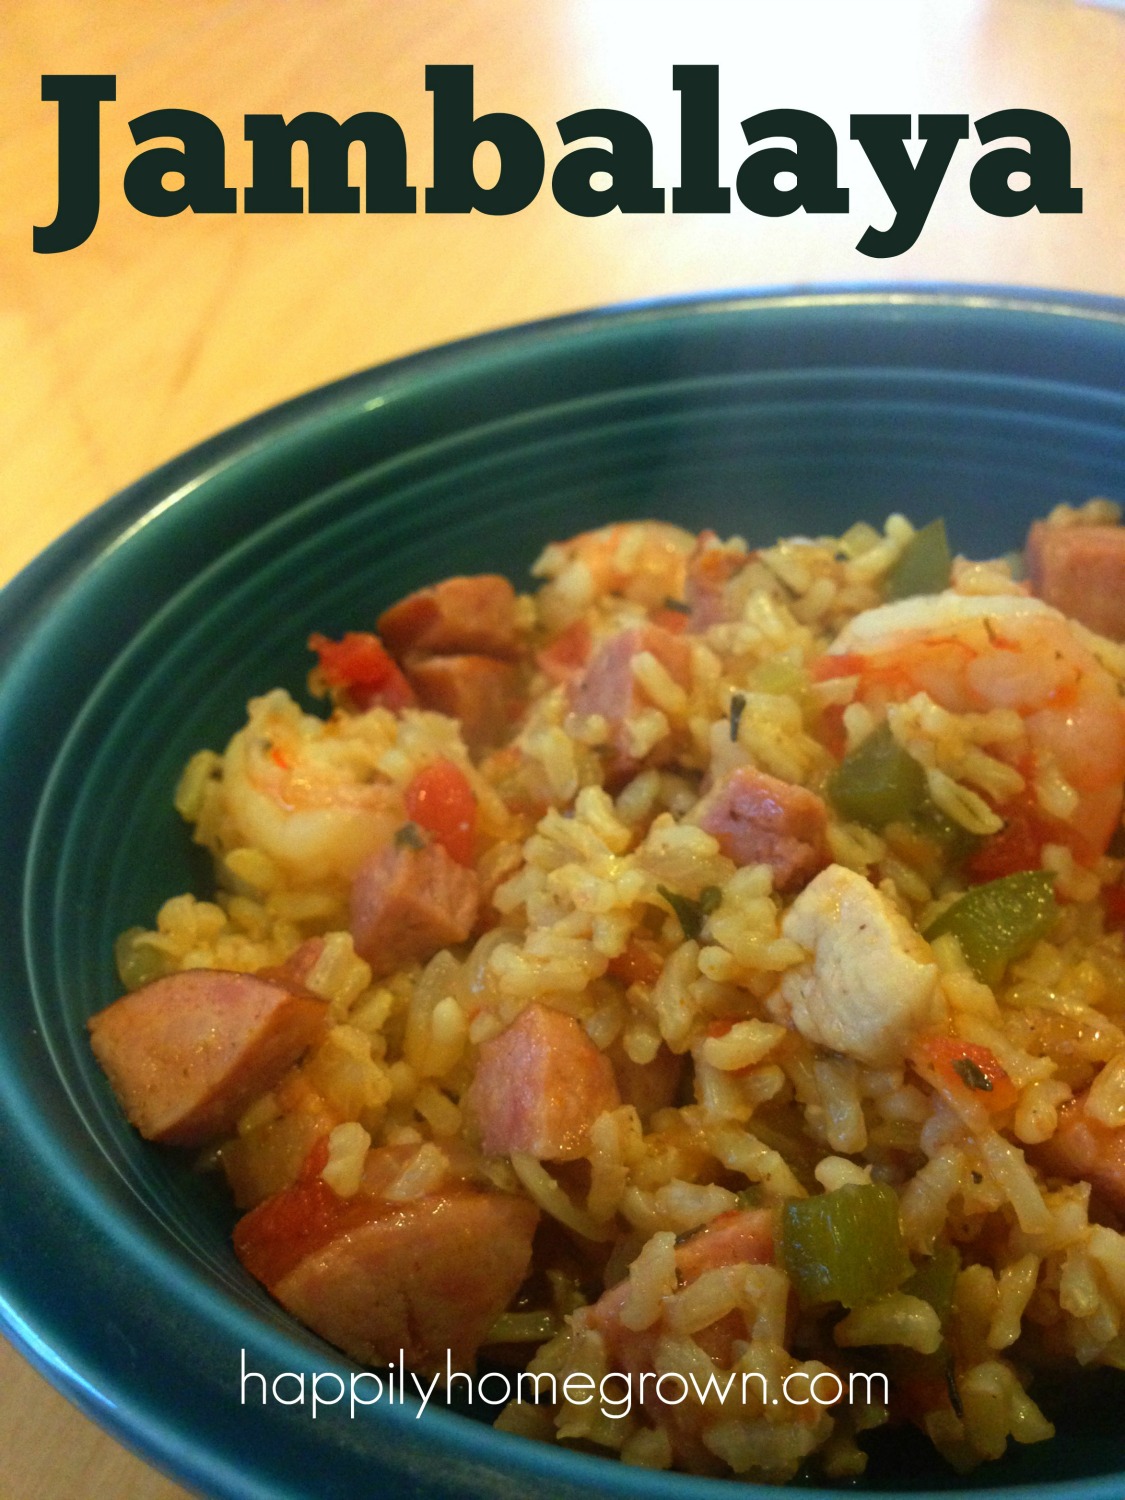 My Jambalaya has big flavors without the heat. A perfect mix of chicken, pork, shrimp, trinity, and rice that has the whole family asking for more.